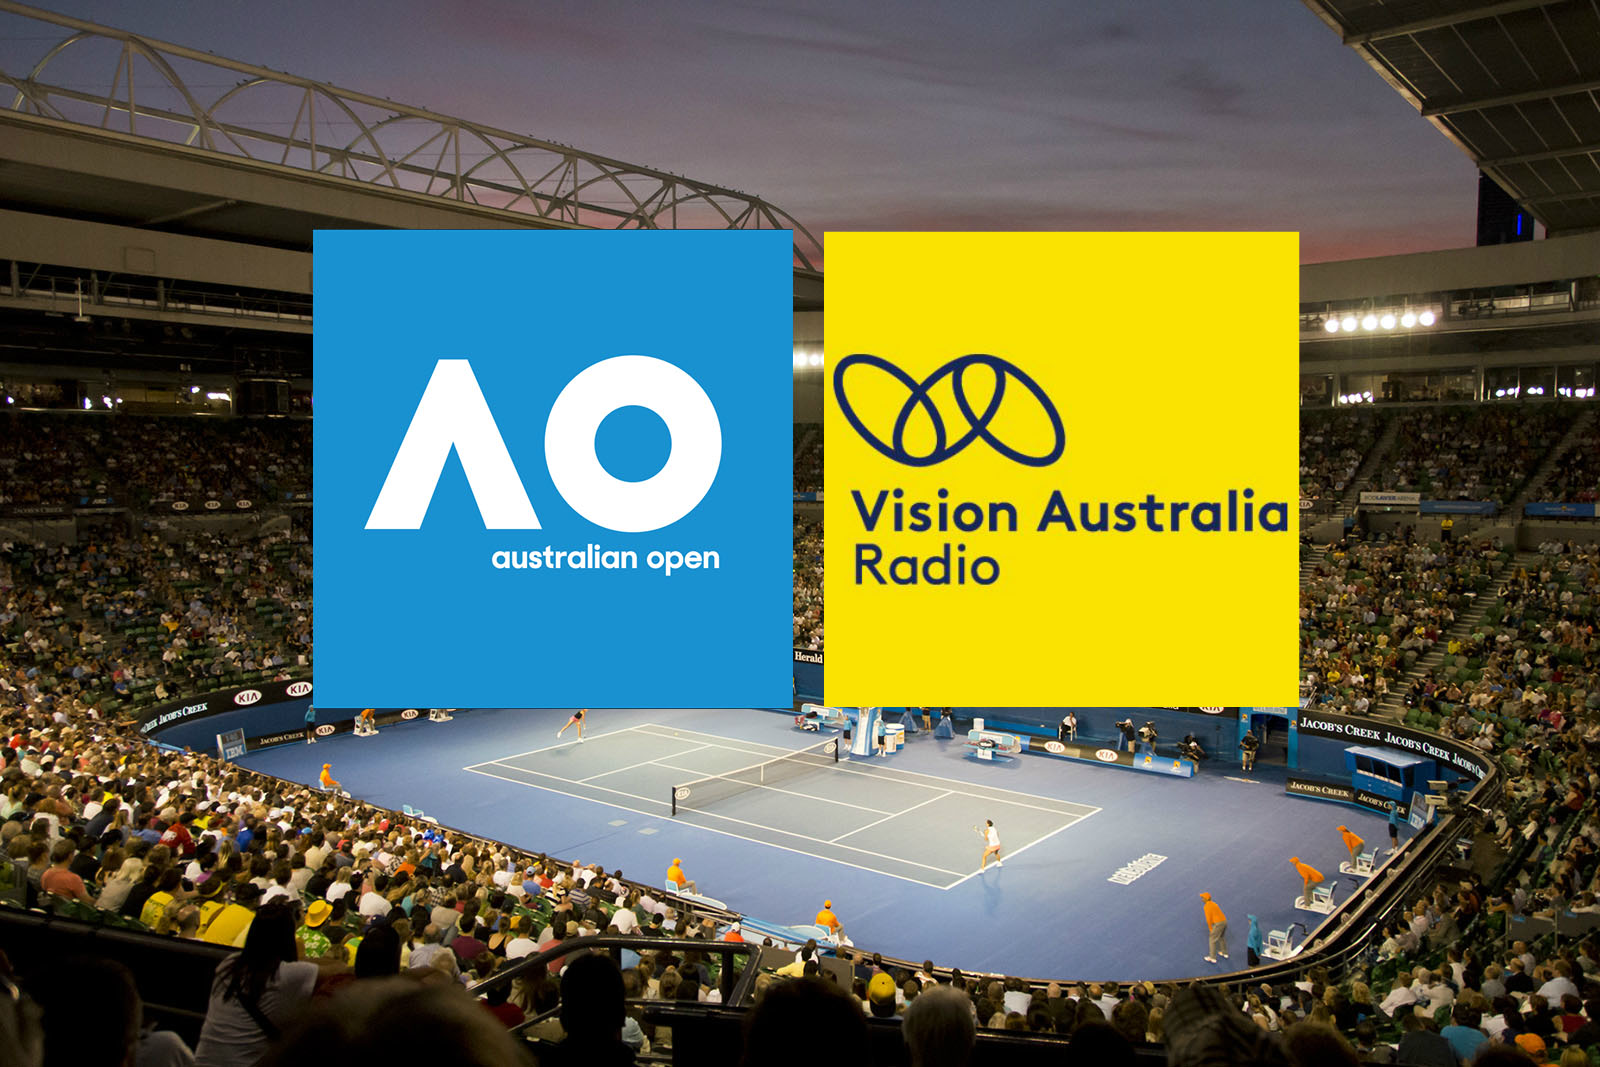 AO and Vision Australia logo overlayed an image of tennis arena full of spectators